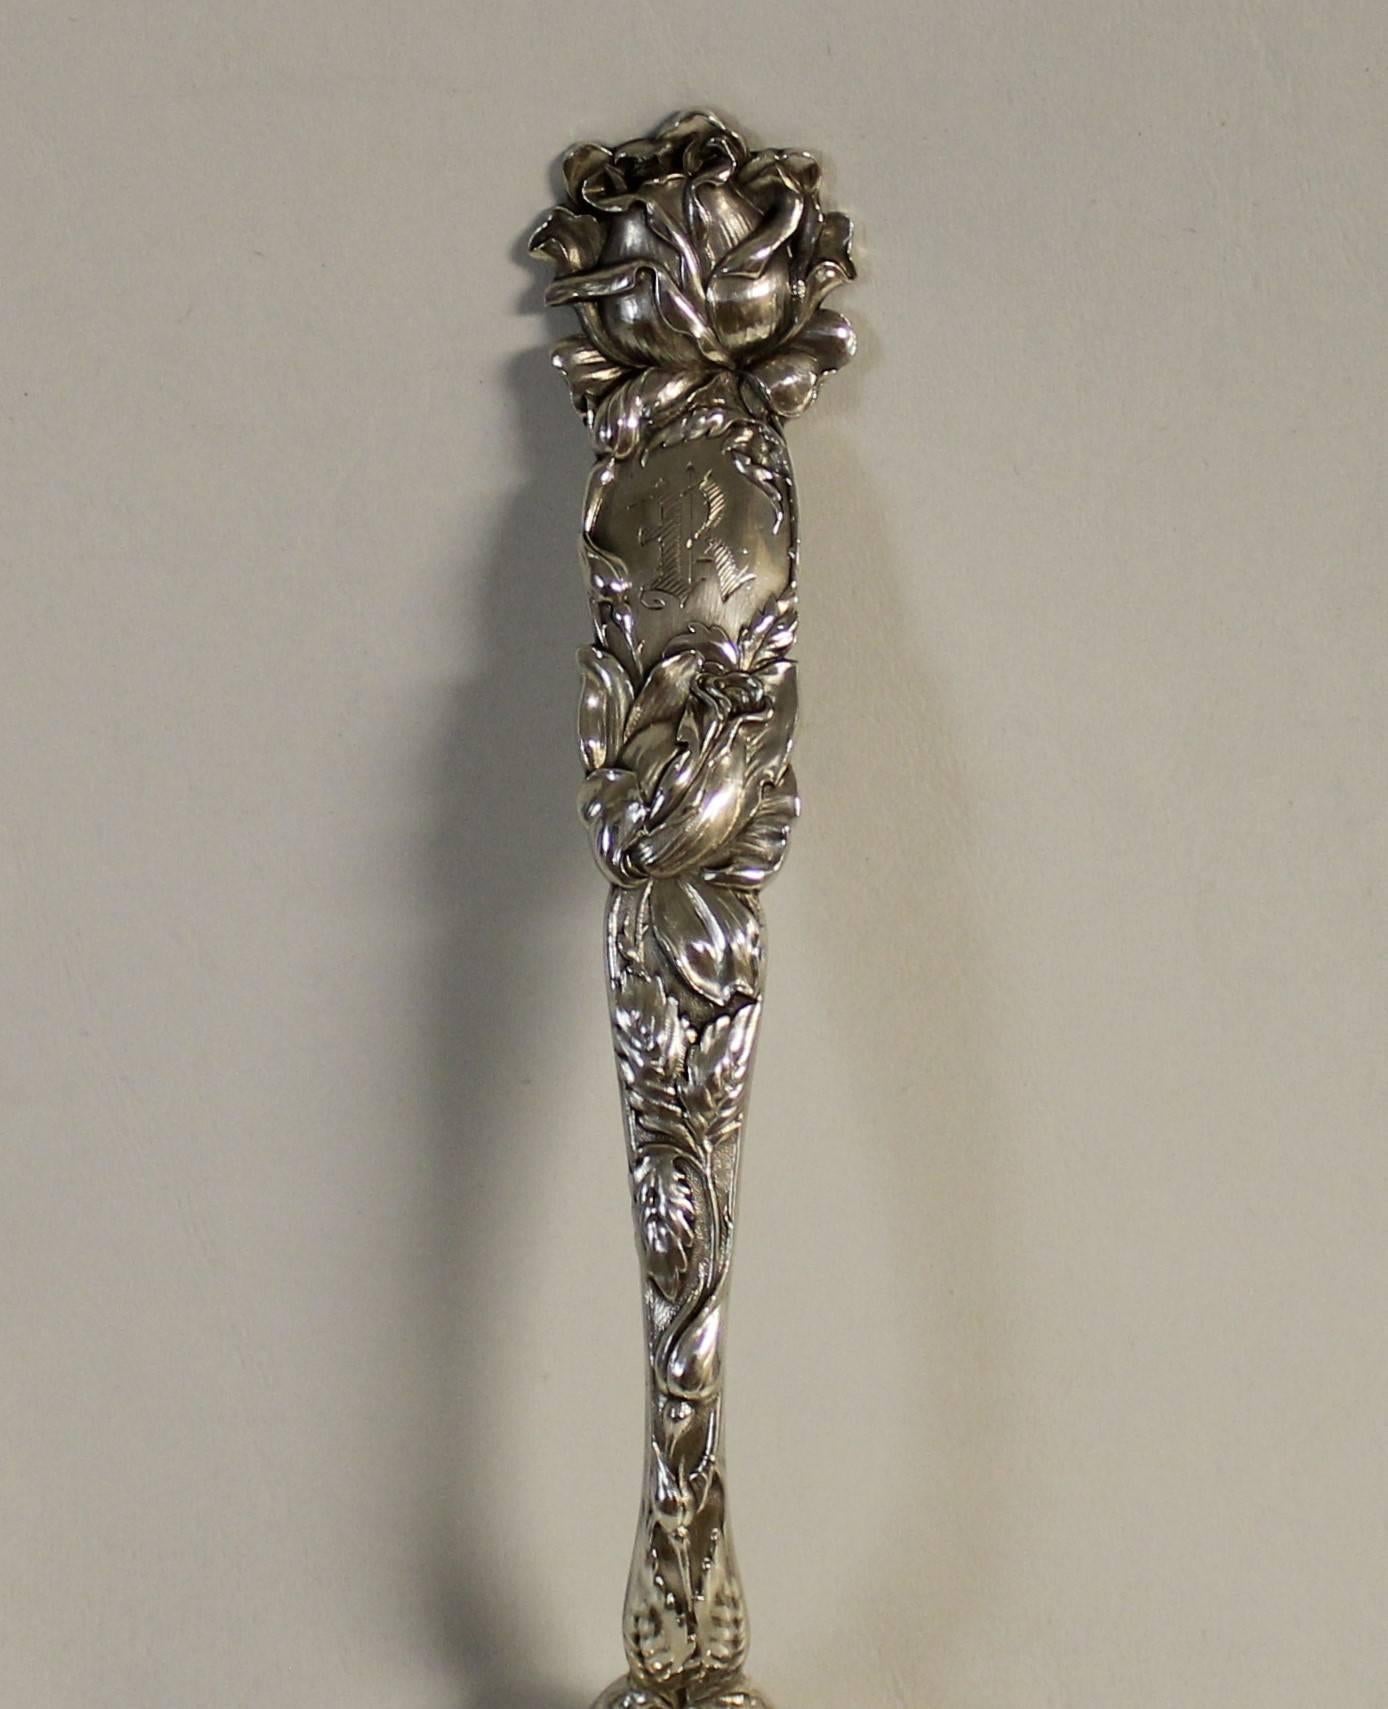 American 19th century sterling silver berry spoon.